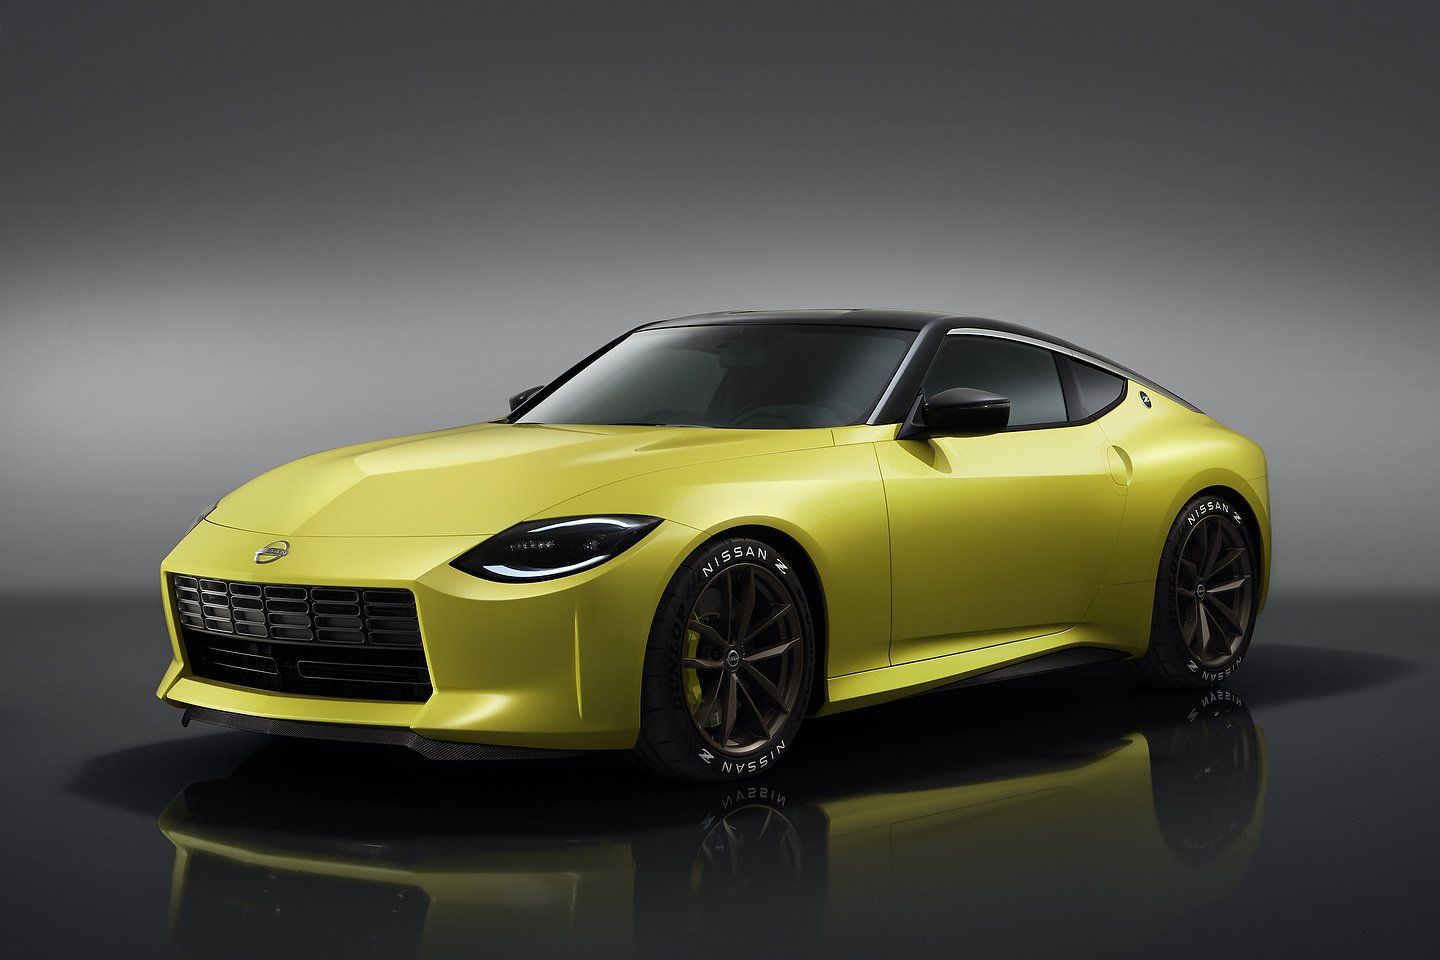 Nissan Z Proto unveiled with manual gearbox and twin-turbo V6